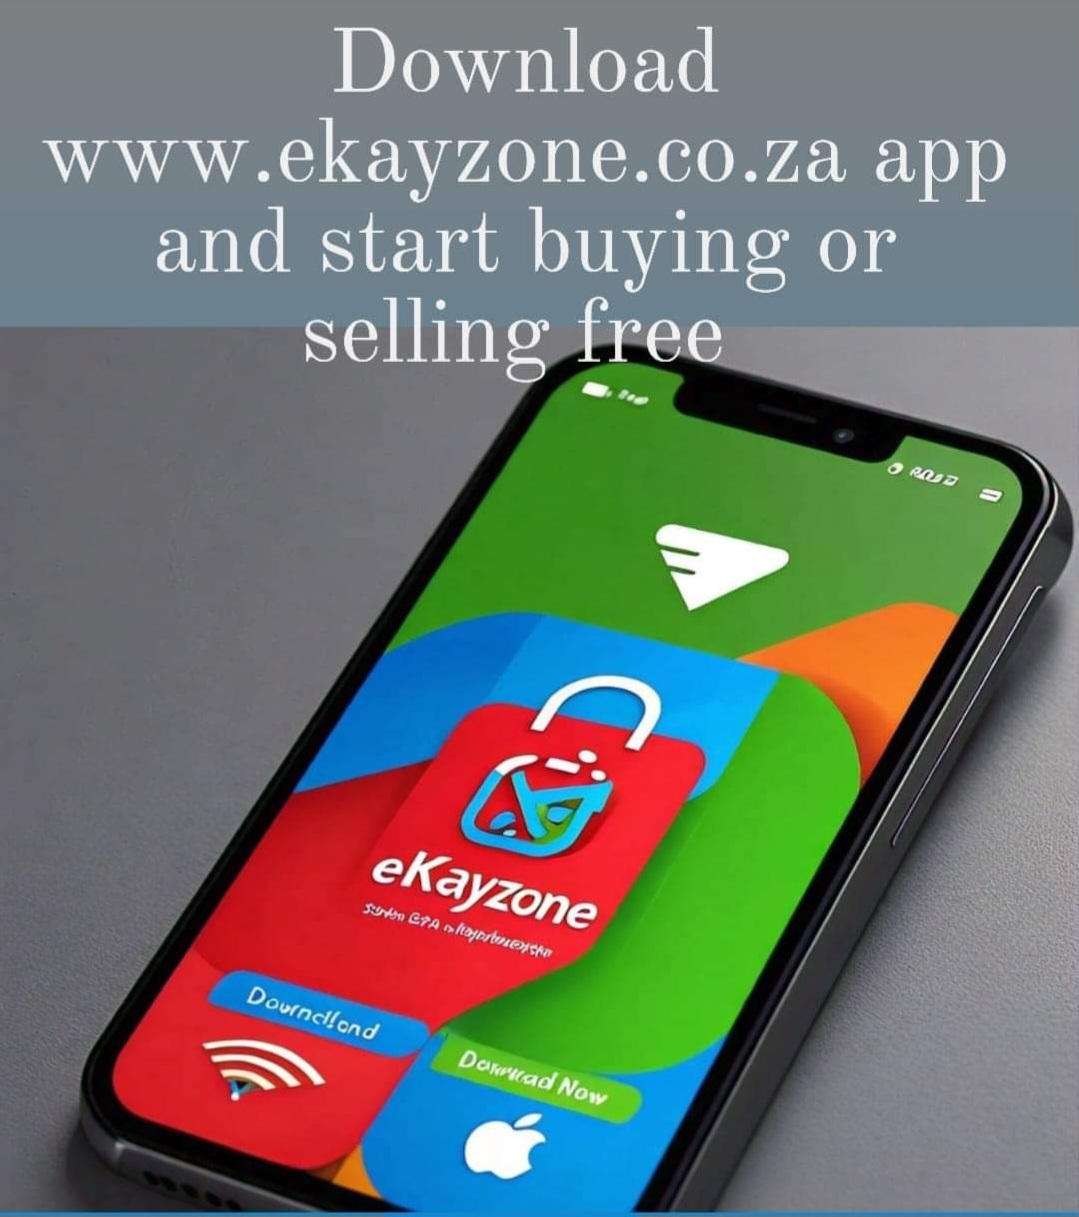 Download eKayzone mobile app to buy and sell free online